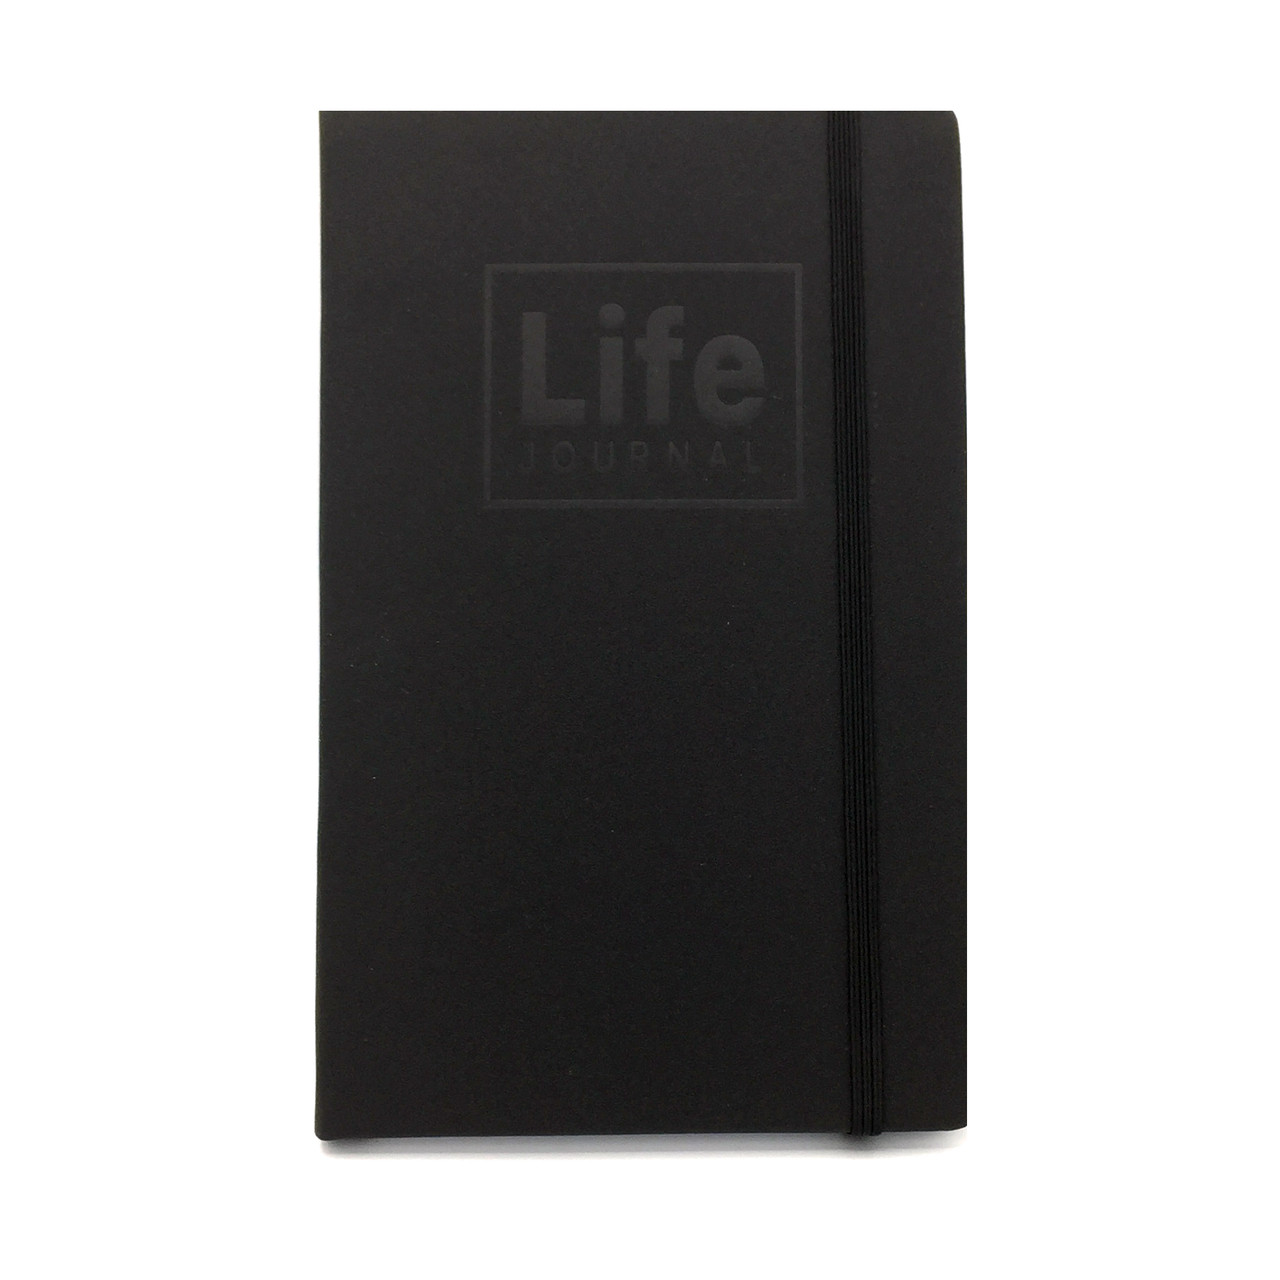 Kids Diary Journal Top Secret Record Your Life Dreams and Thoughts RM1326 